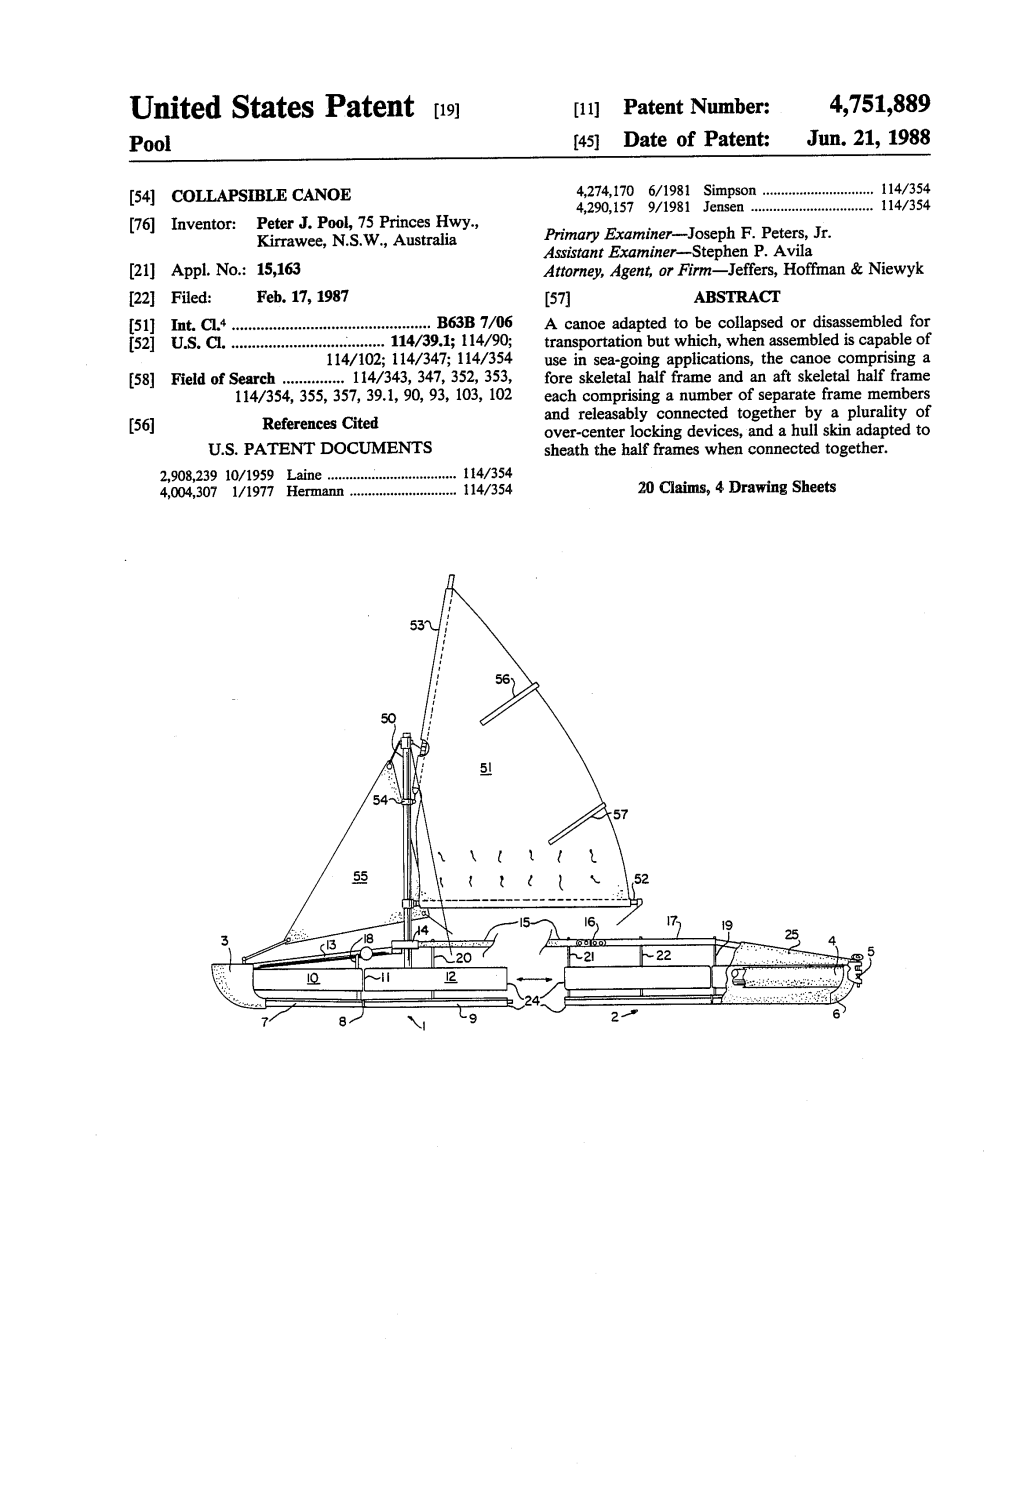 United States Patent (19) 11 Patent Number: 4,751,889 Pool (45